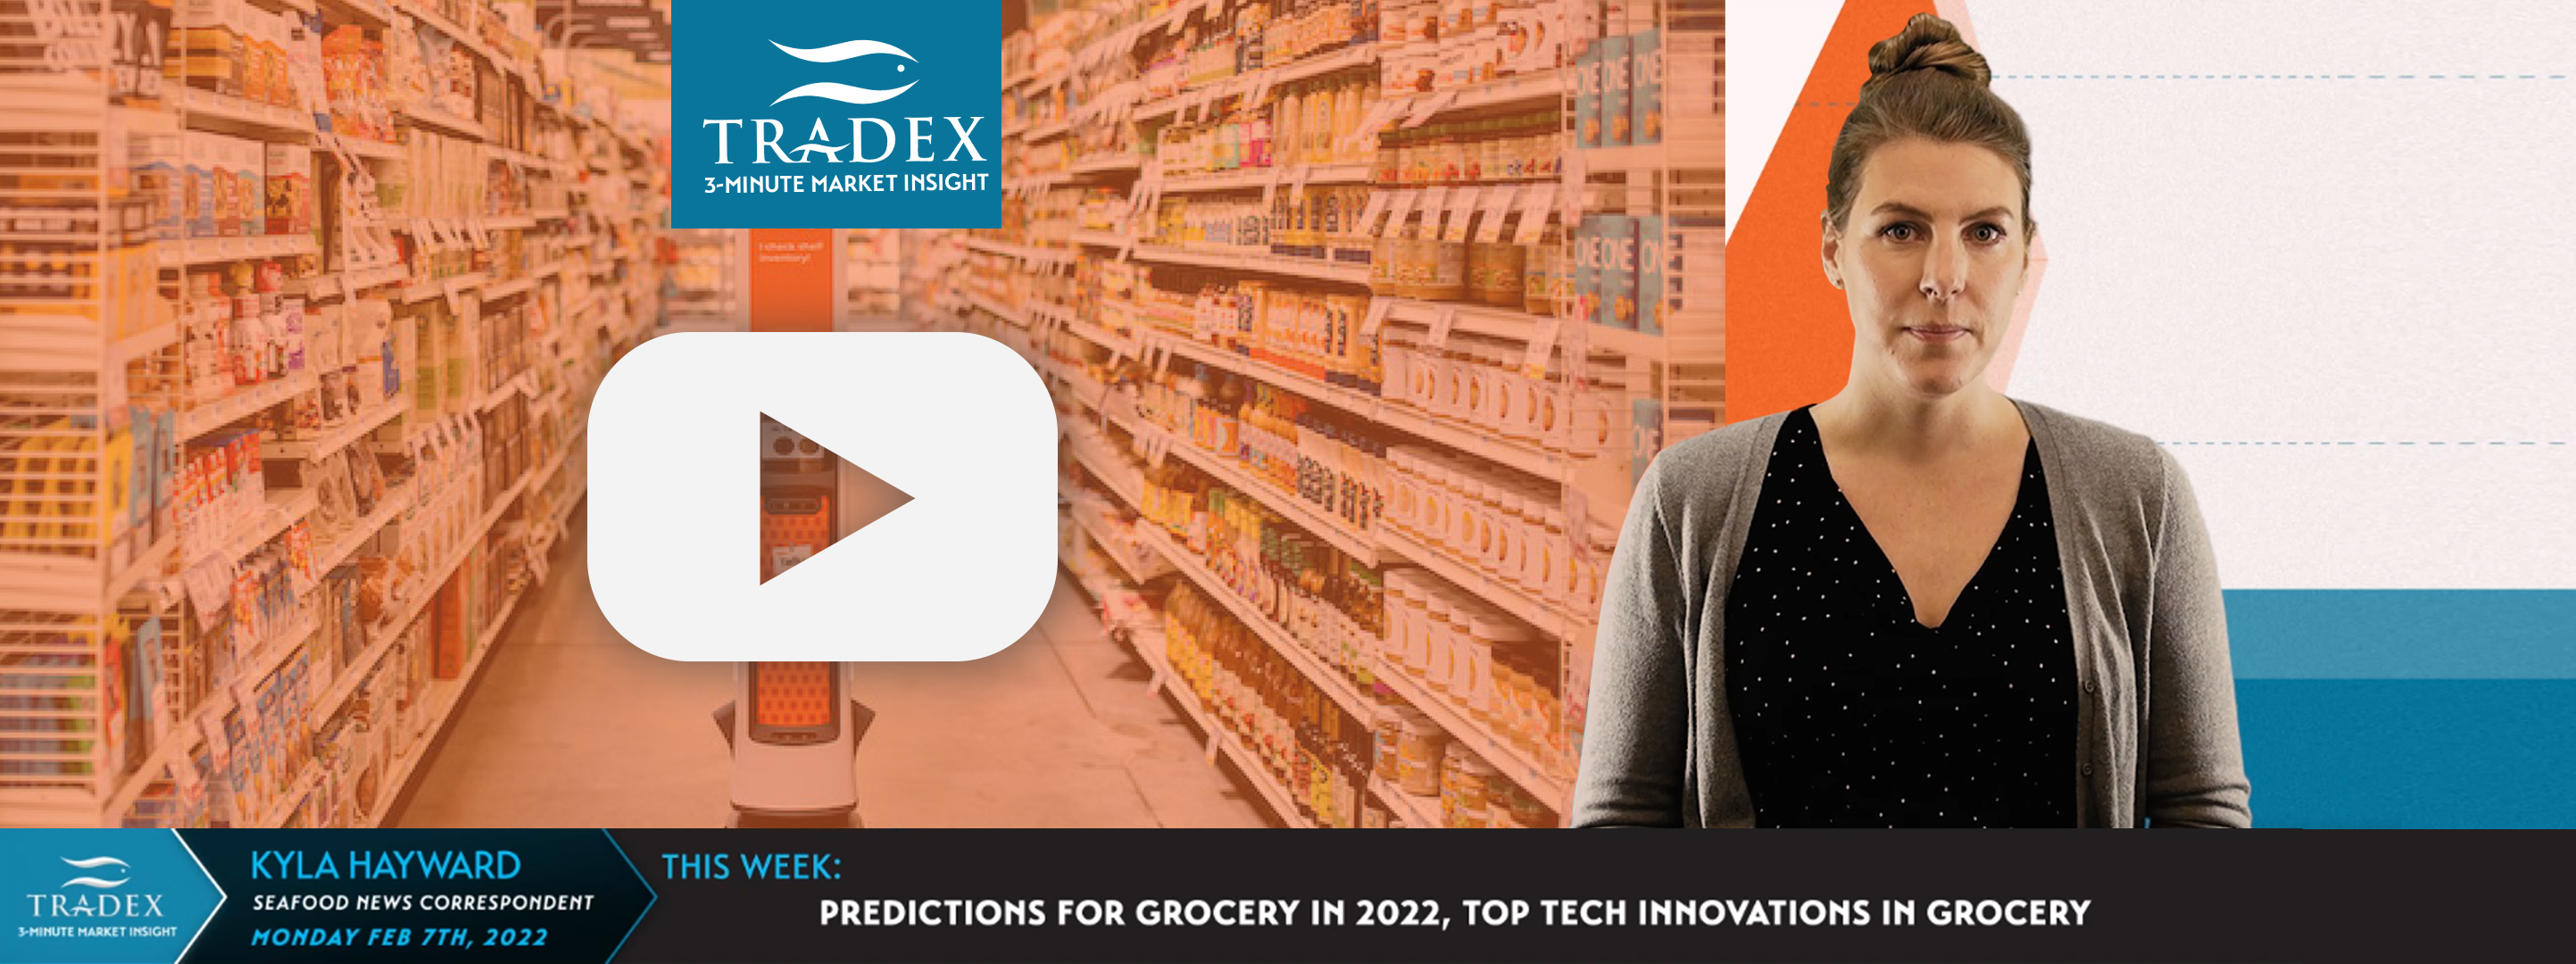 FUTURISTIC PREDICTIONS FOR GROCERY STORES 2022